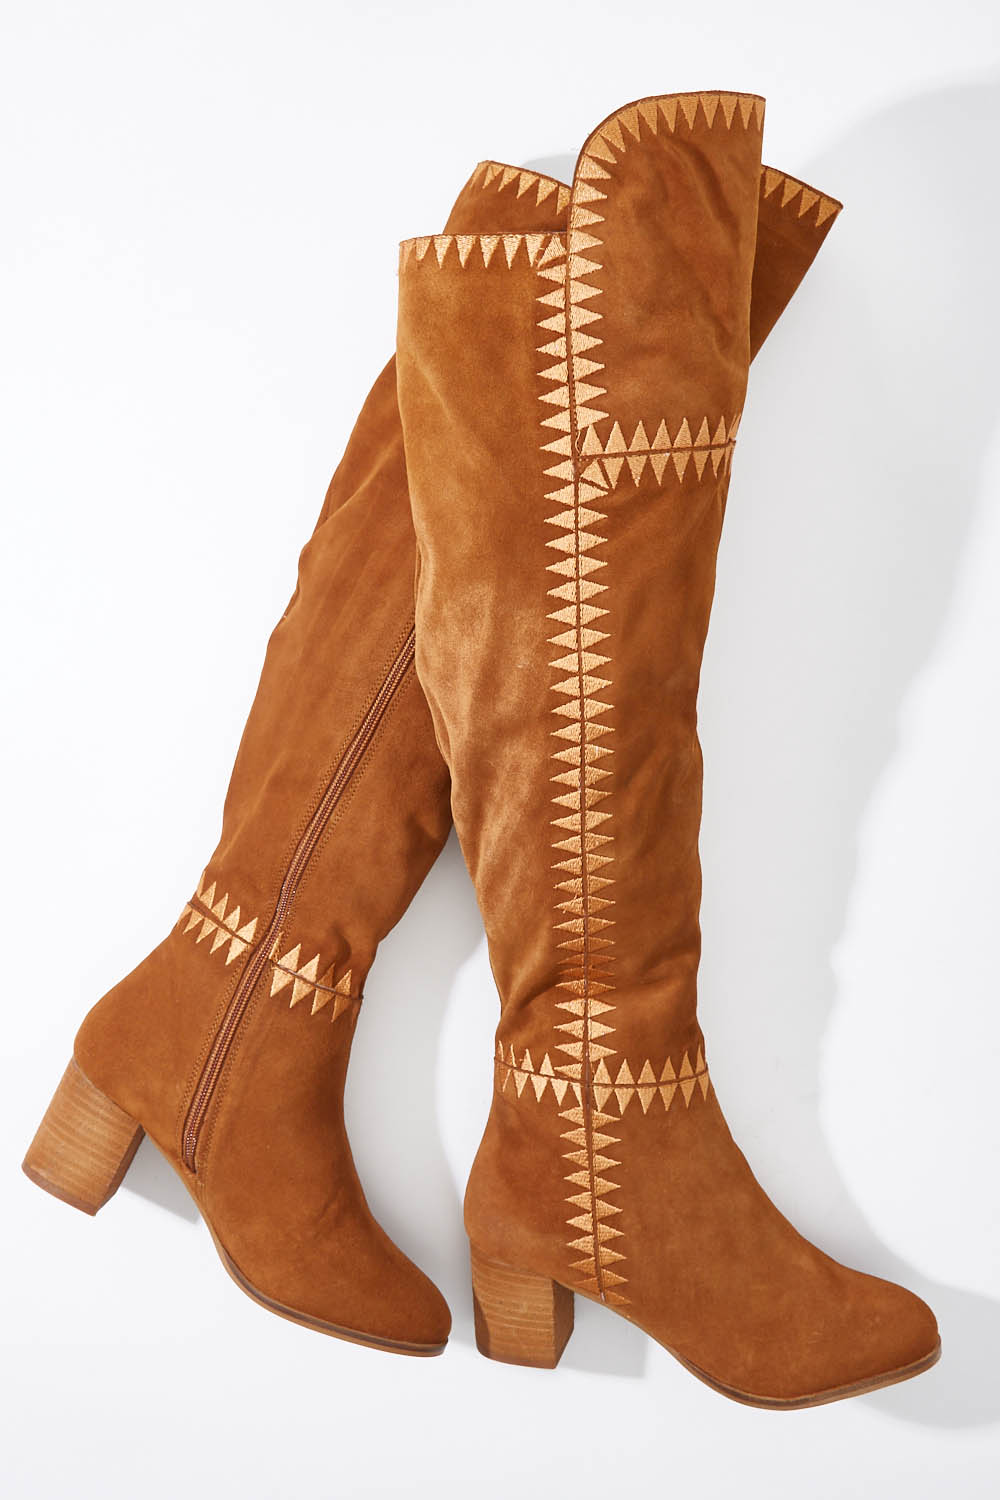 coconuts by matisse over the knee boots